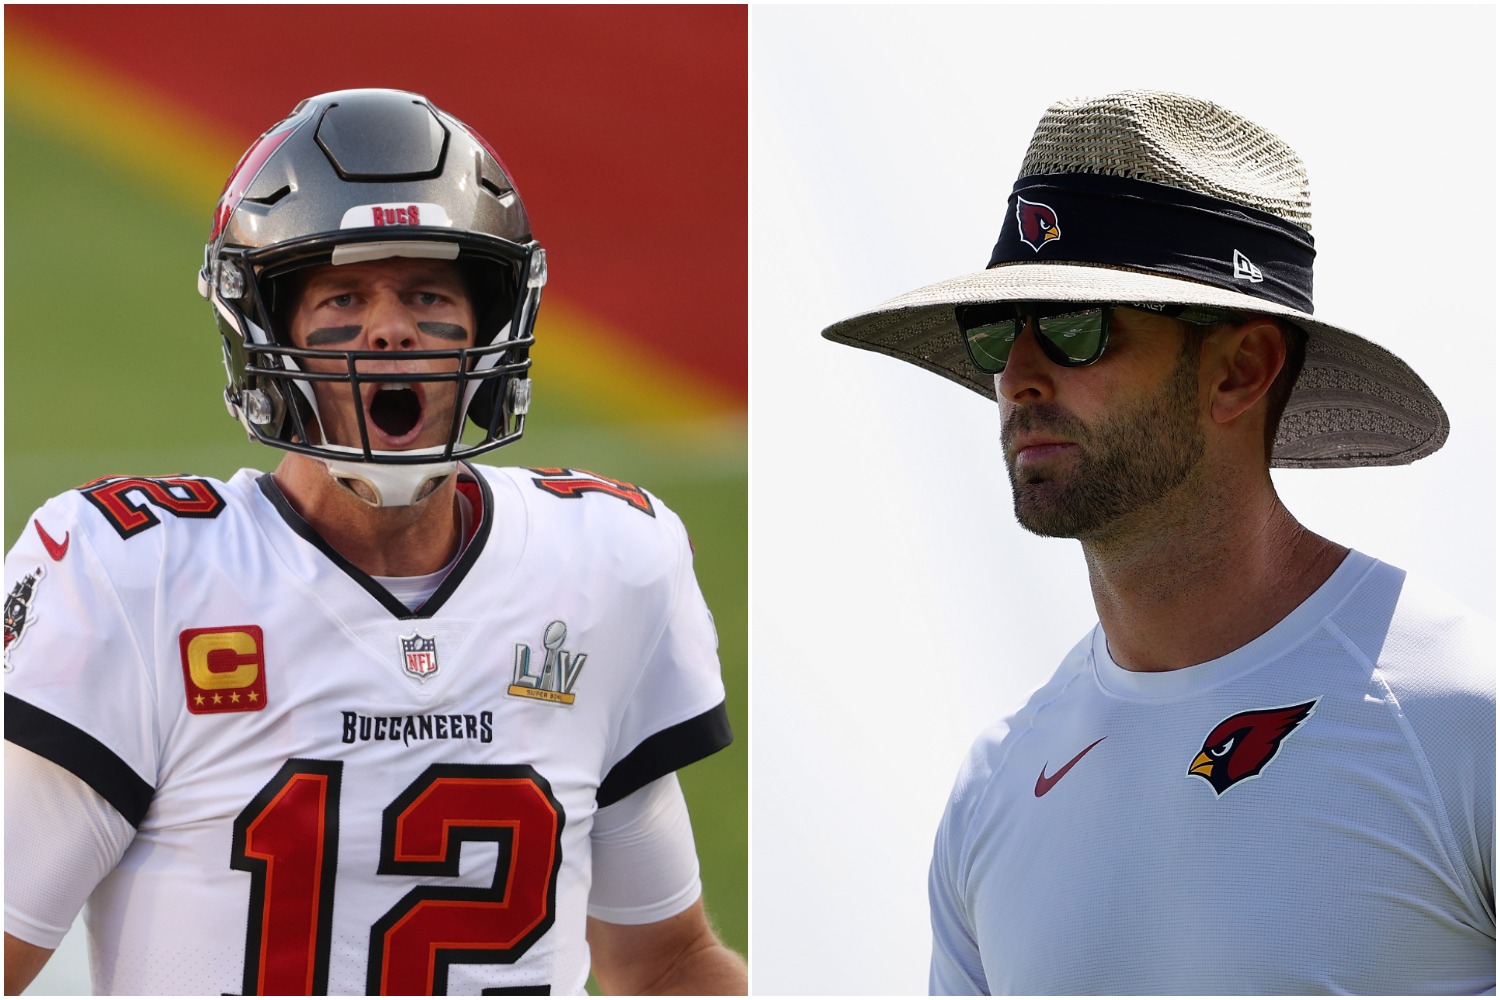 Tom Brady shouts at the crowd as Kliff Kingsbury watches the Arizona Cardinals practice.